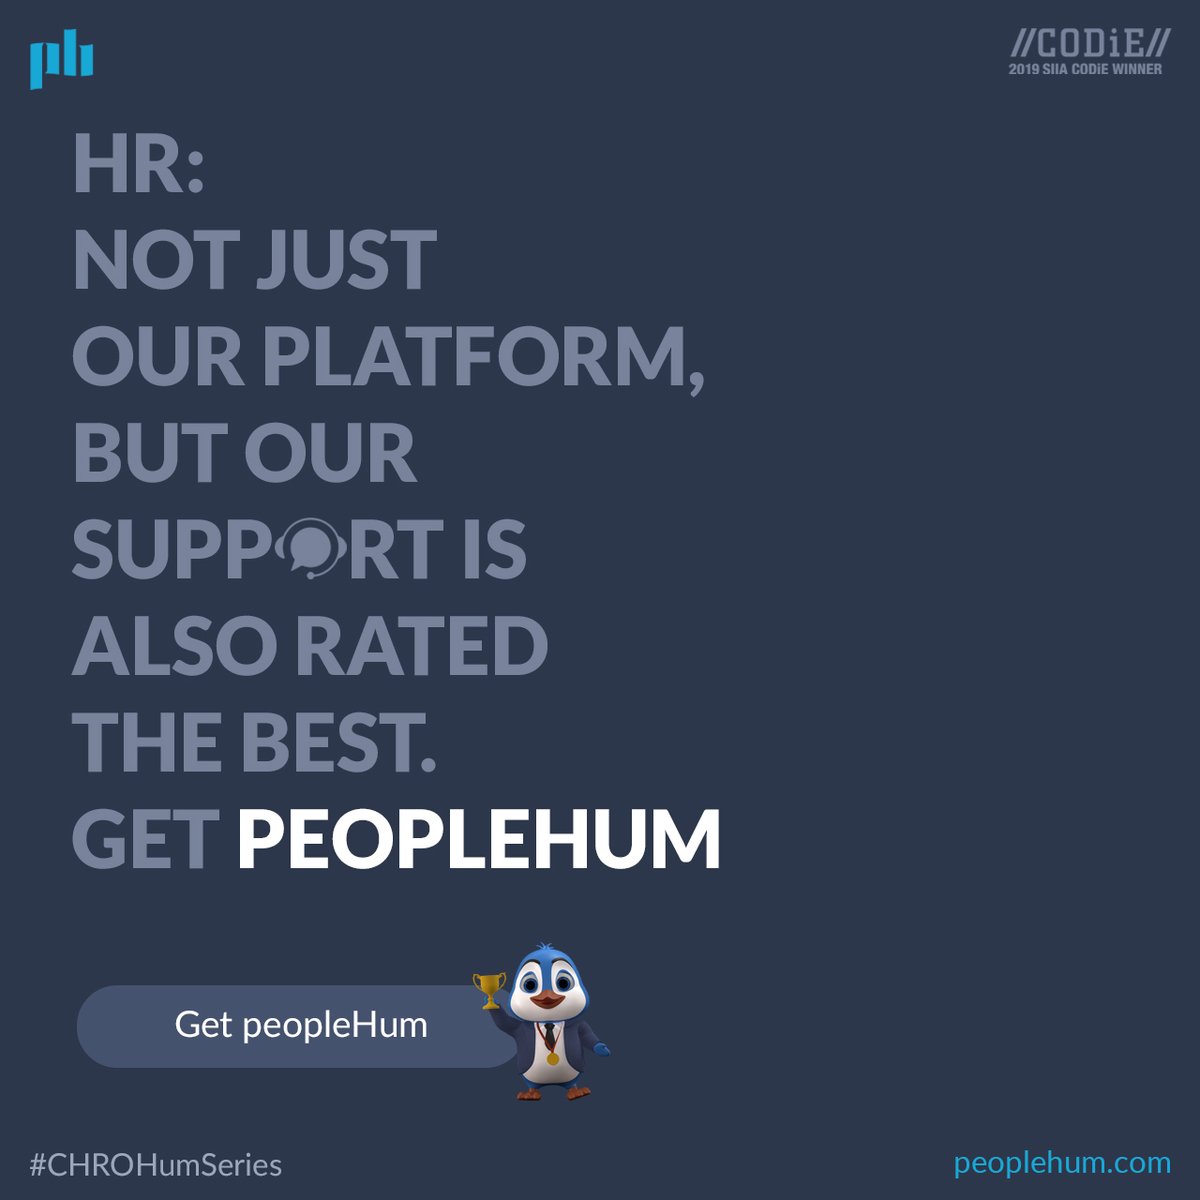 For a seamless HR experience, get peopleHum! Schedule a demo today: s.peoplehum.com/pty3u #hr #humanresources #hrcommunity #hrtech #management #technology #productivity #innovation #ai #business #usa #washington #newyork #losangeles #Chicago